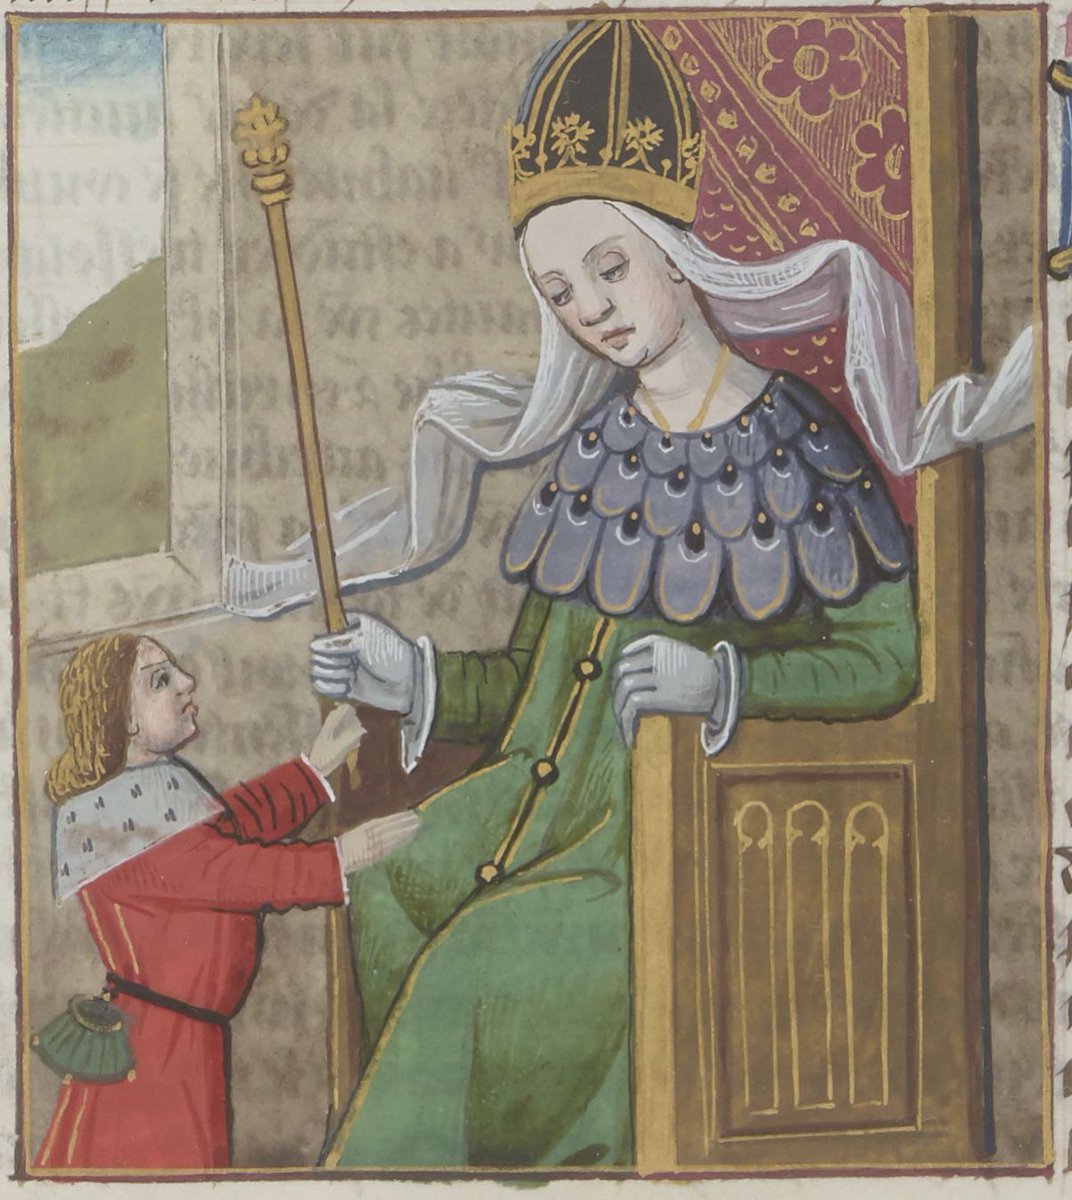 Moving forward in time. Here's a c. 1450 illustration of Irene of Athens and her unfortunate son Constantine VI from an edition of Boccaccio's De Mulieribus Claris. No idea what he said about her—if it was pure hagiography or included her filicide.